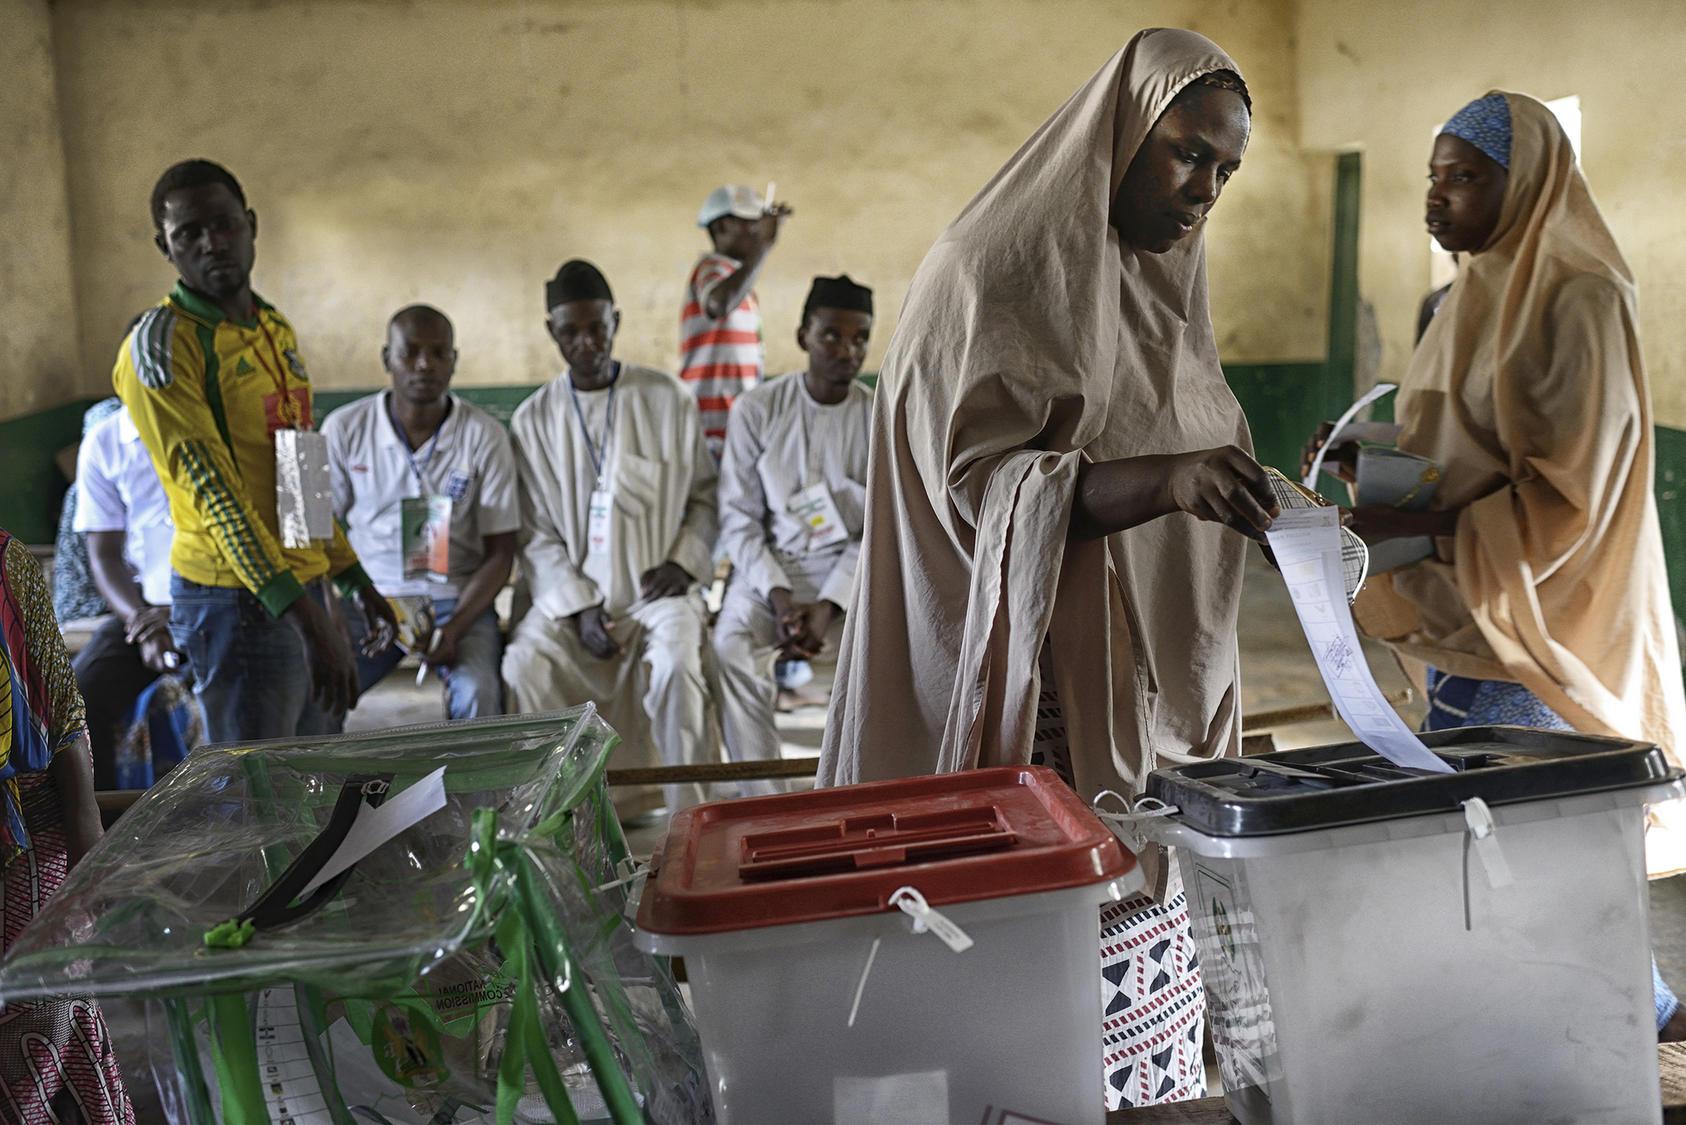 A woman votes at a polling station in Kano, Nigeria, March 28, 2015. (Samuel Aranda/The New York Times)